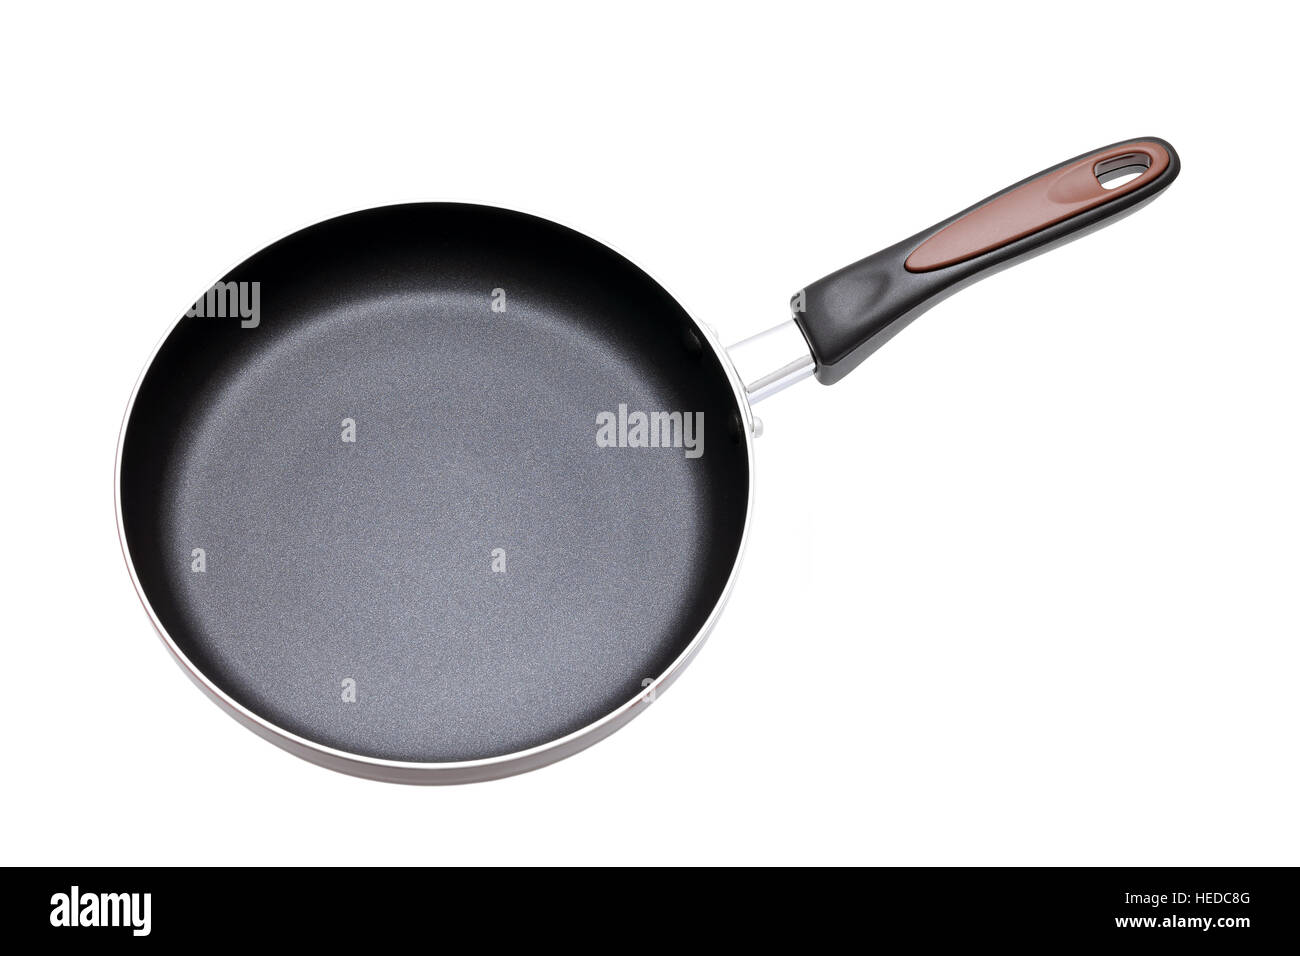 https://c8.alamy.com/comp/HEDC8G/large-frying-pan-isolated-on-white-background-HEDC8G.jpg